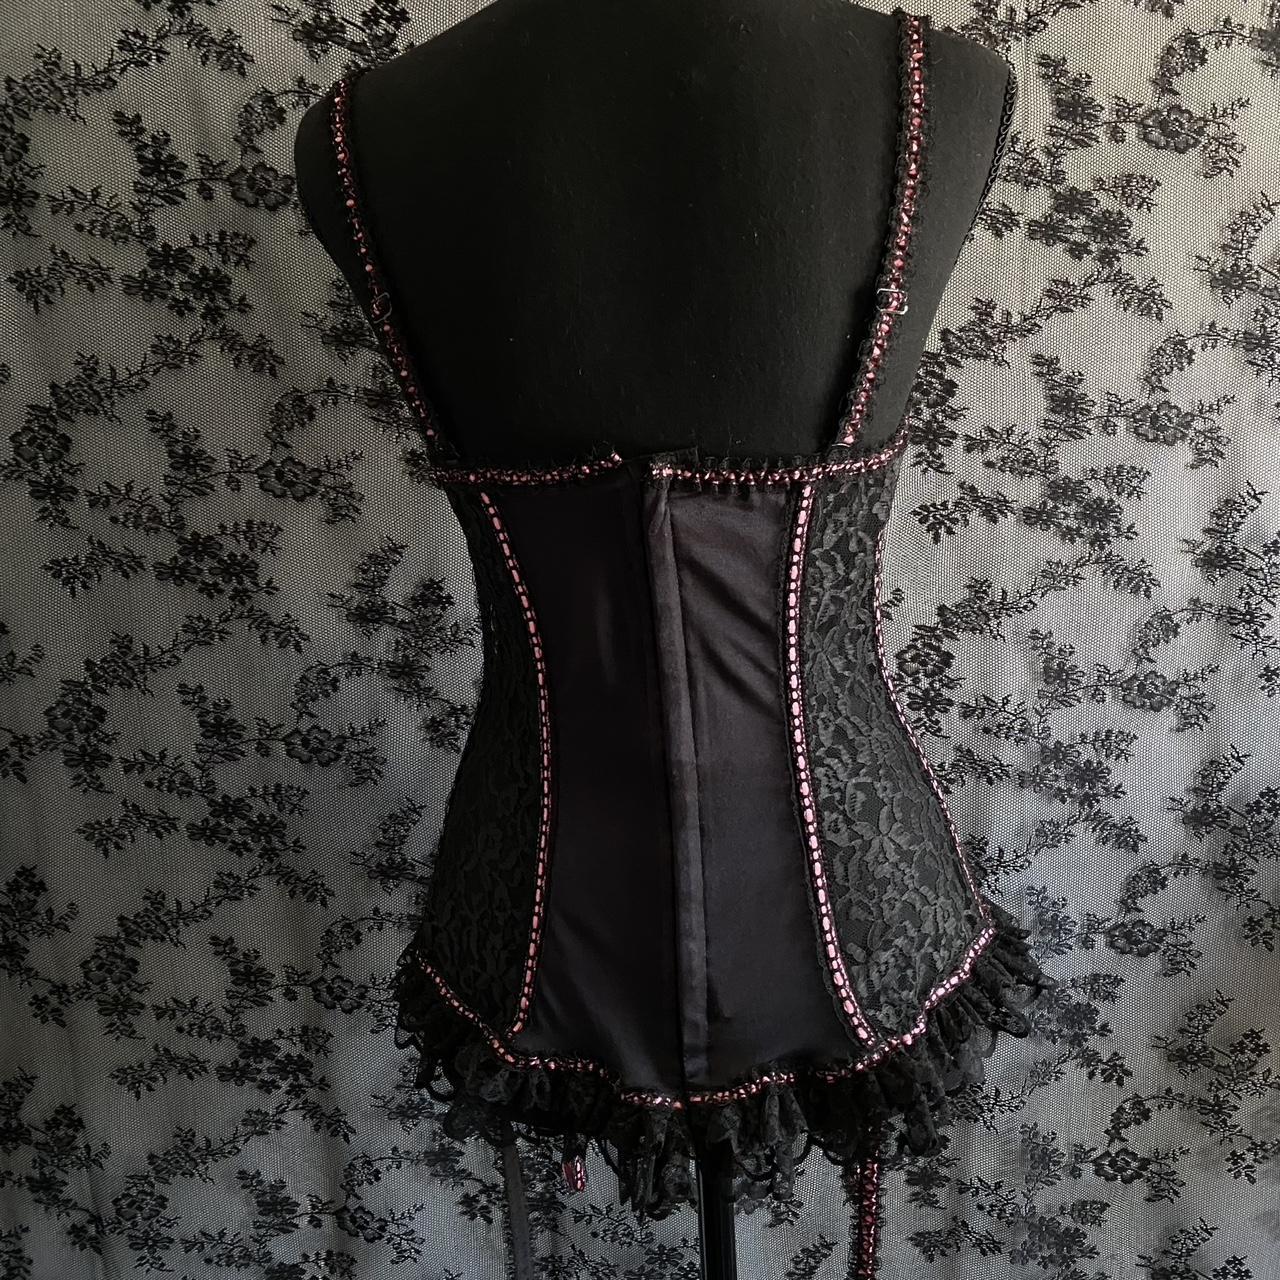 American Vintage Women's Black and Pink Corset (4)